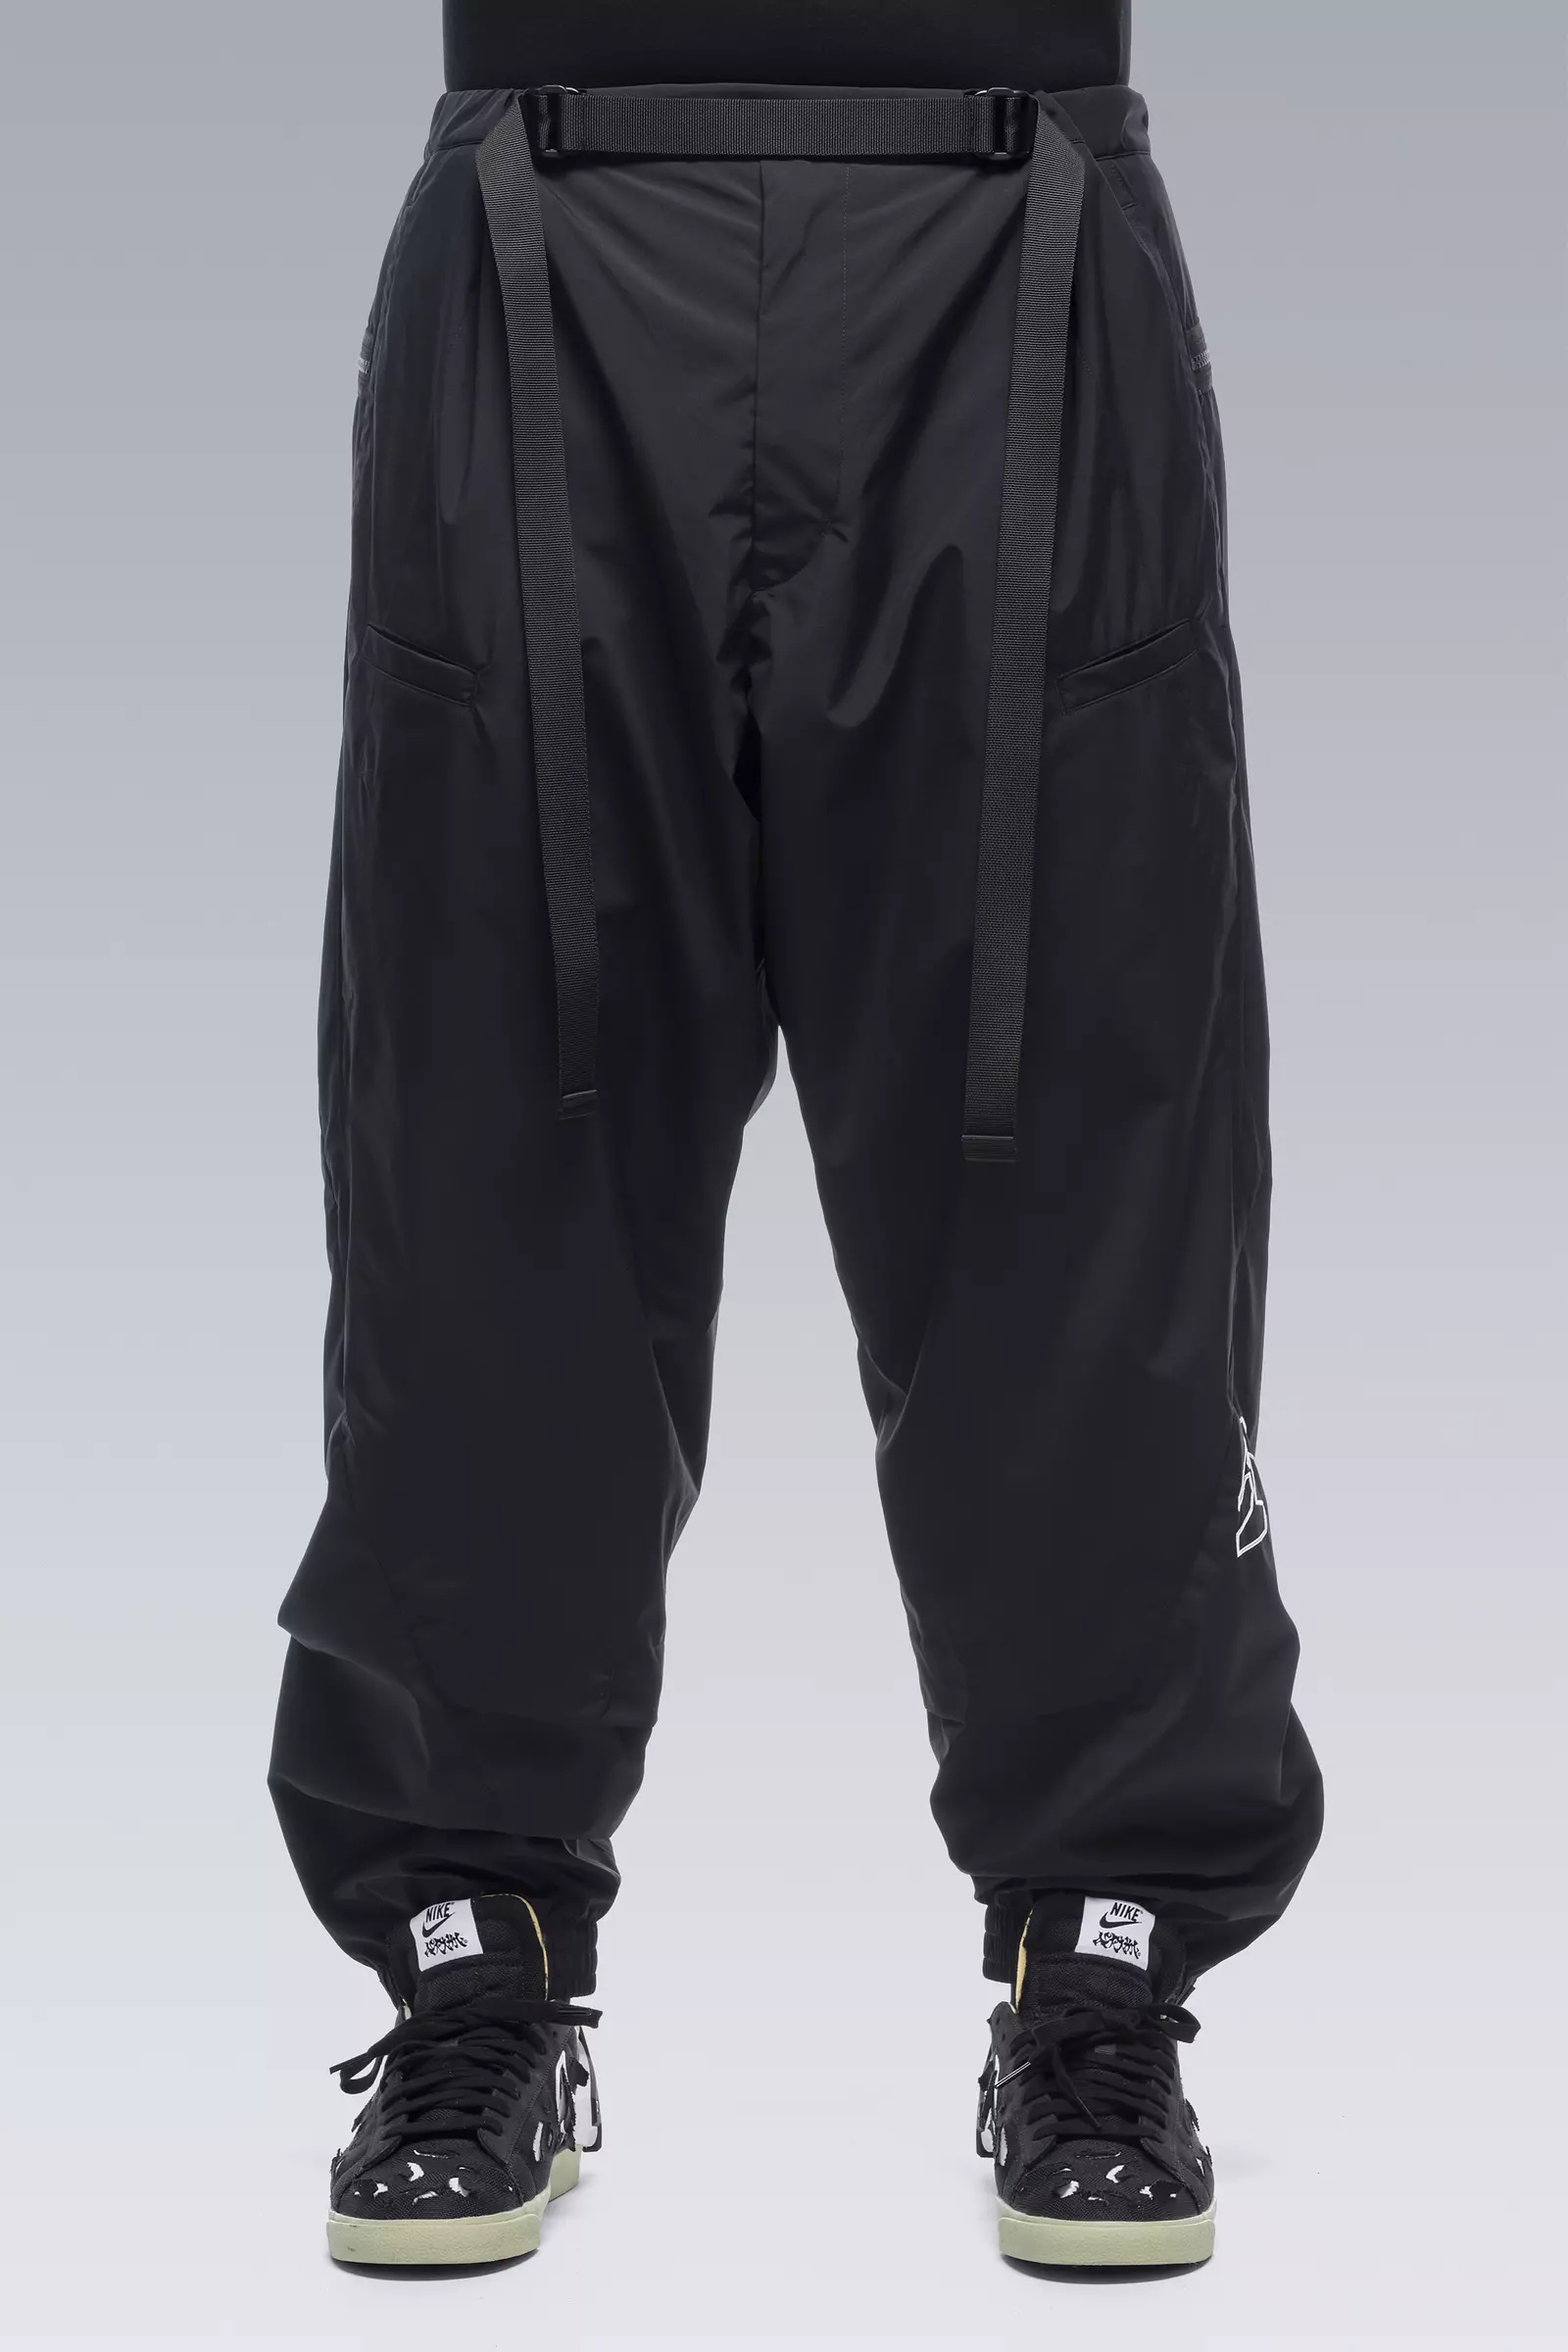 P53-WS 2L Gore-Tex® Windstopper® Insulated Vent Pants Black - 15